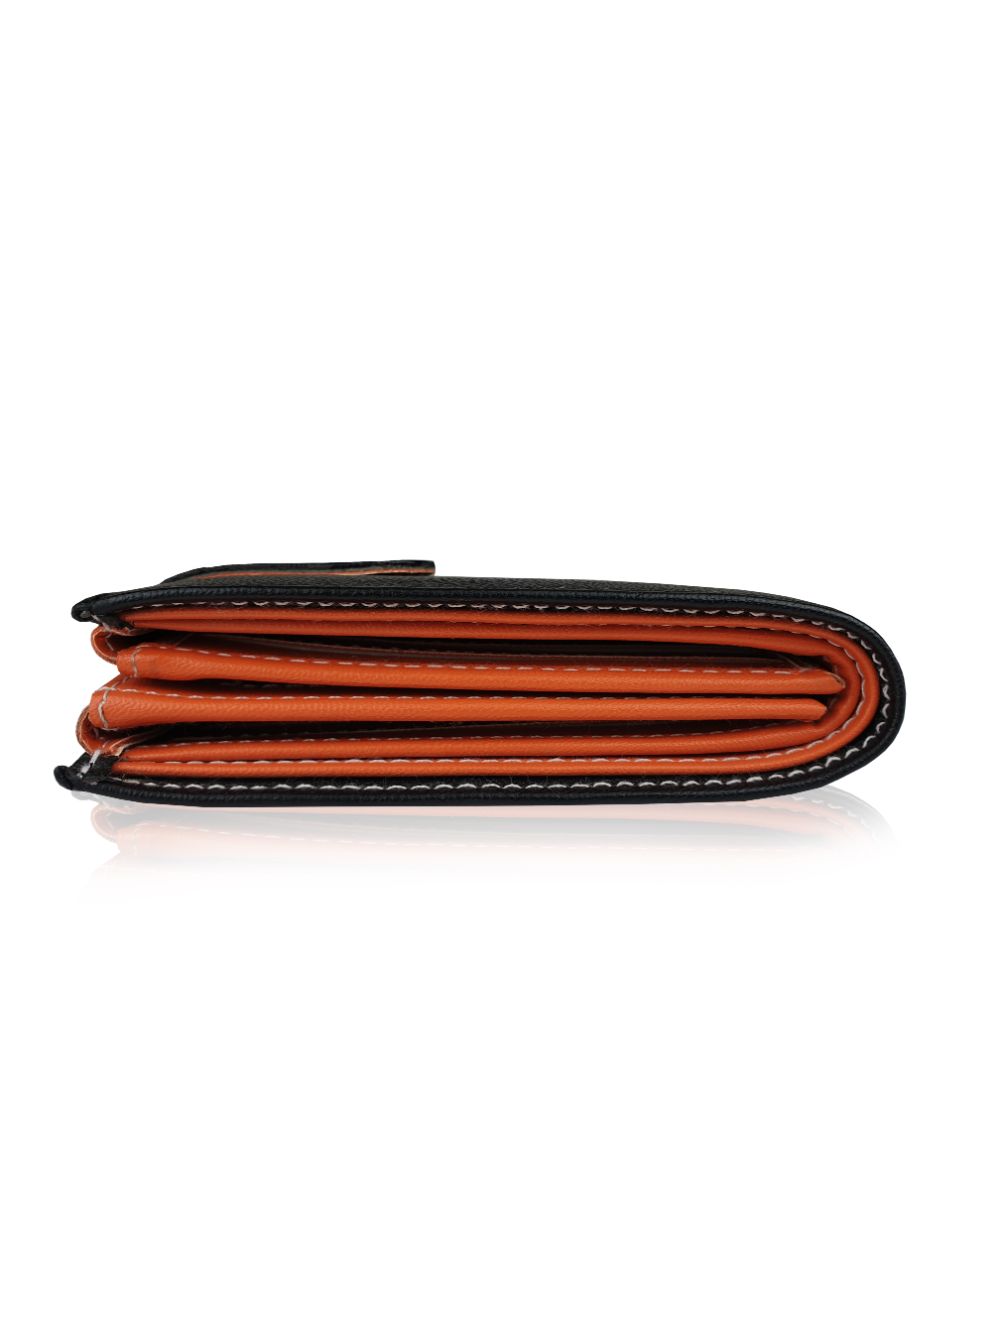 Men's Luxury Card Holders, Business Cards, Coin Purses | LOUIS VUITTON ®